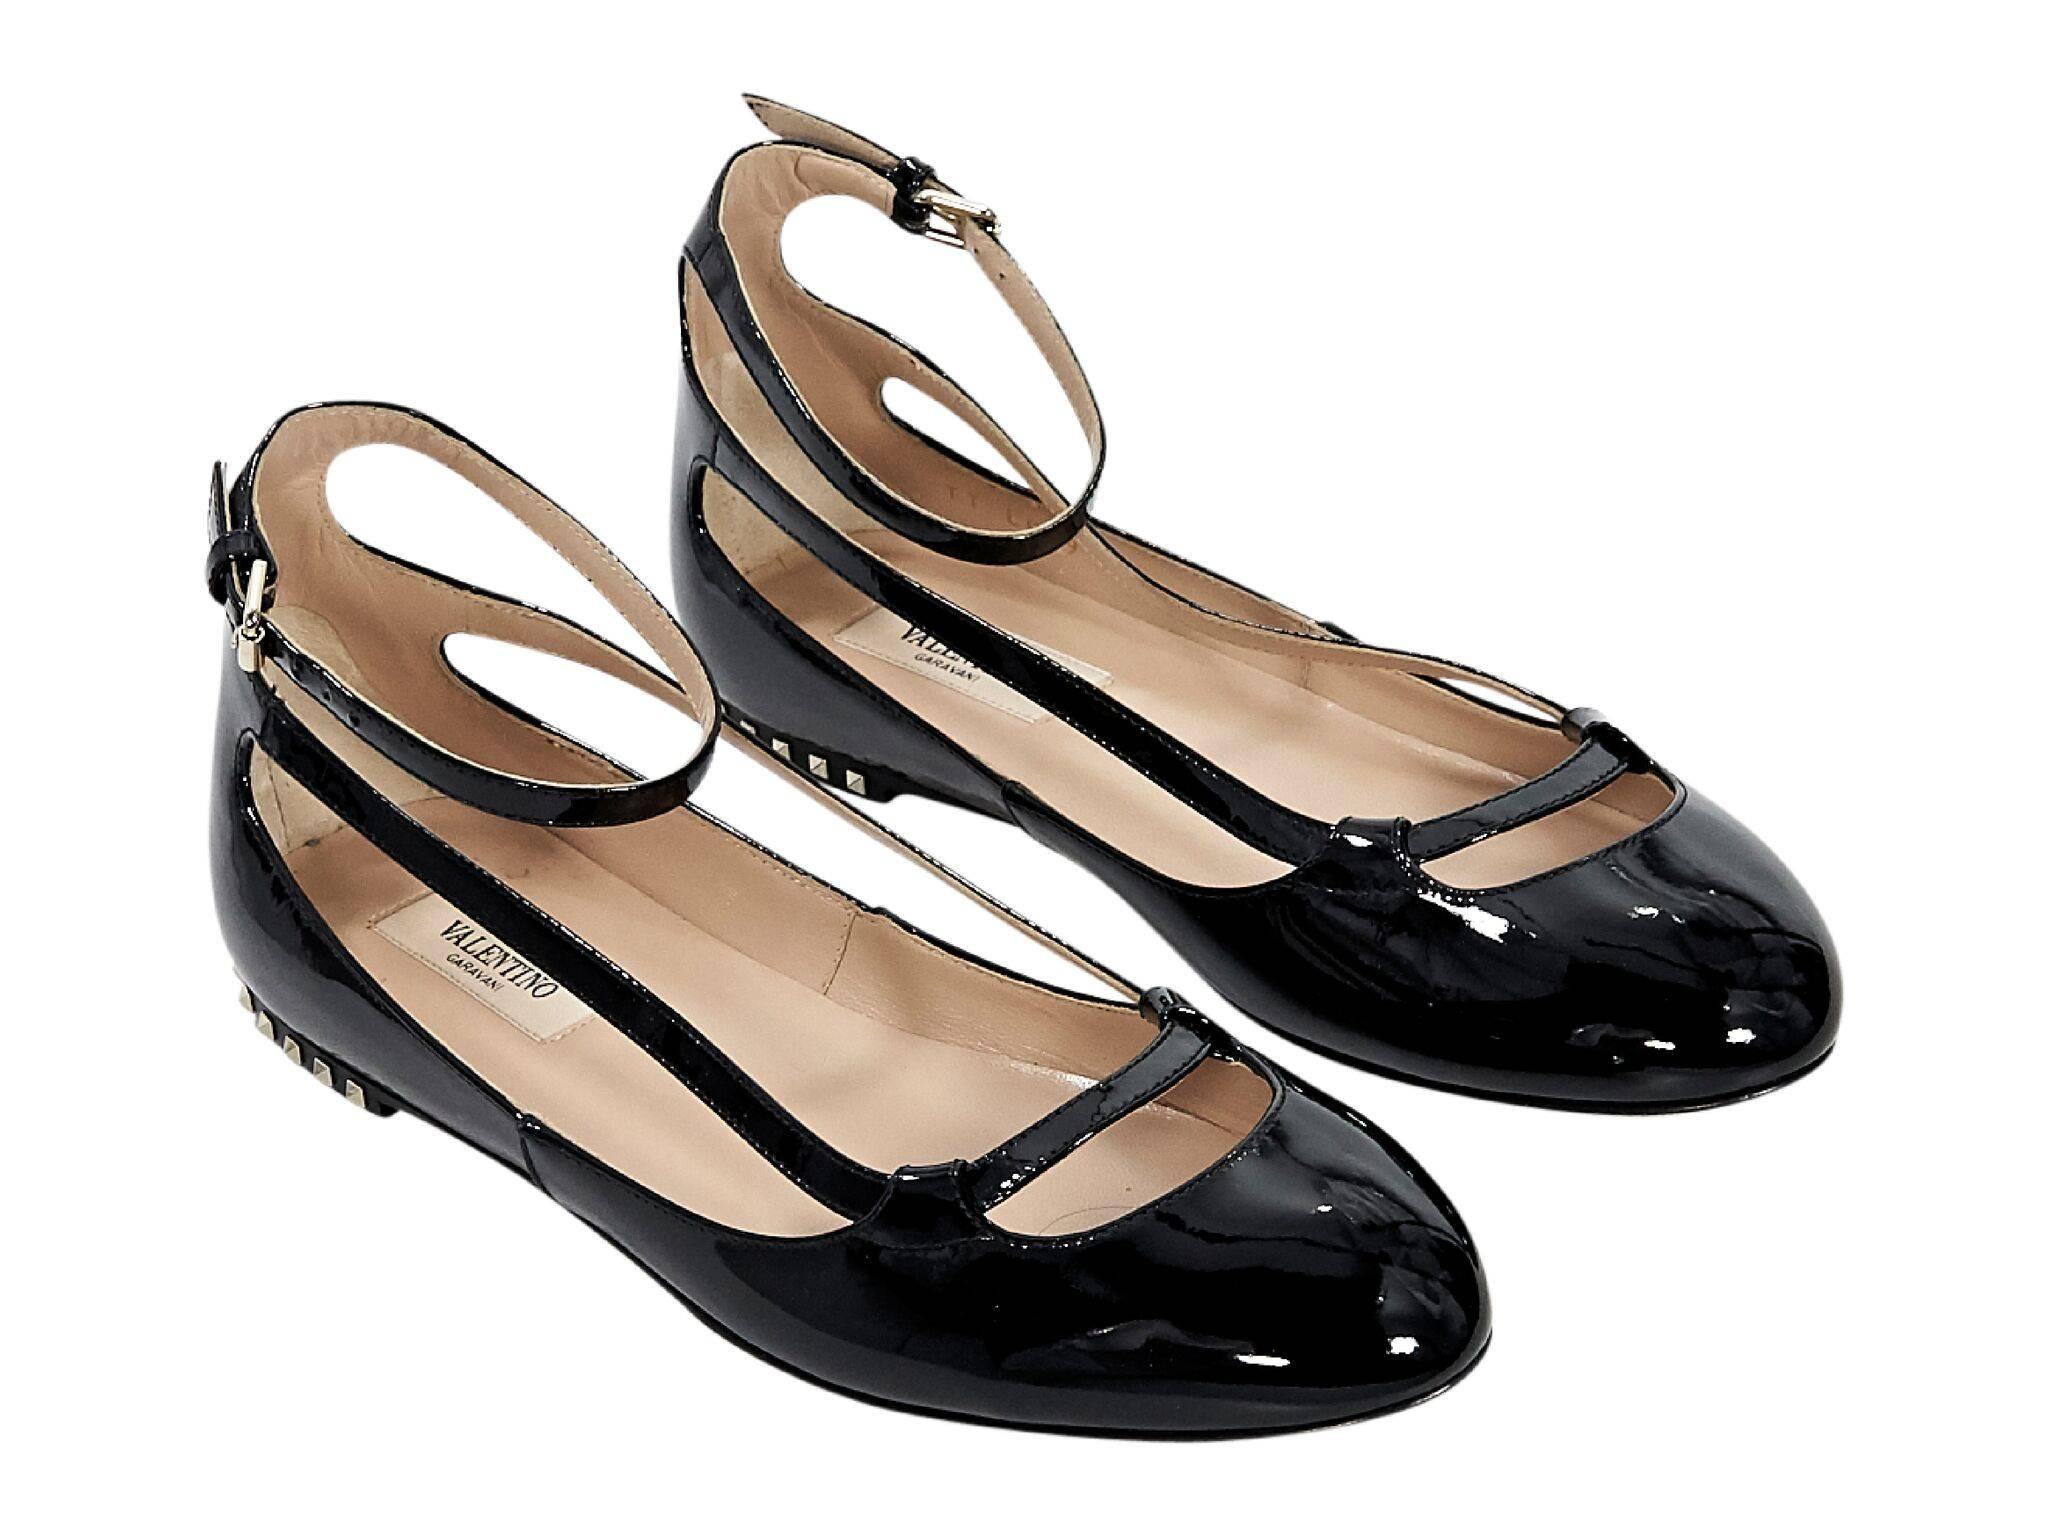 Product details:  Black patent leather ballet flats by Valentino.  Accented with pyramid studs.  Adjustable ankle strap.  Round toe.  Goldtone hardware.
Condition: Pre-owned. Very good.
Est. Retail $995